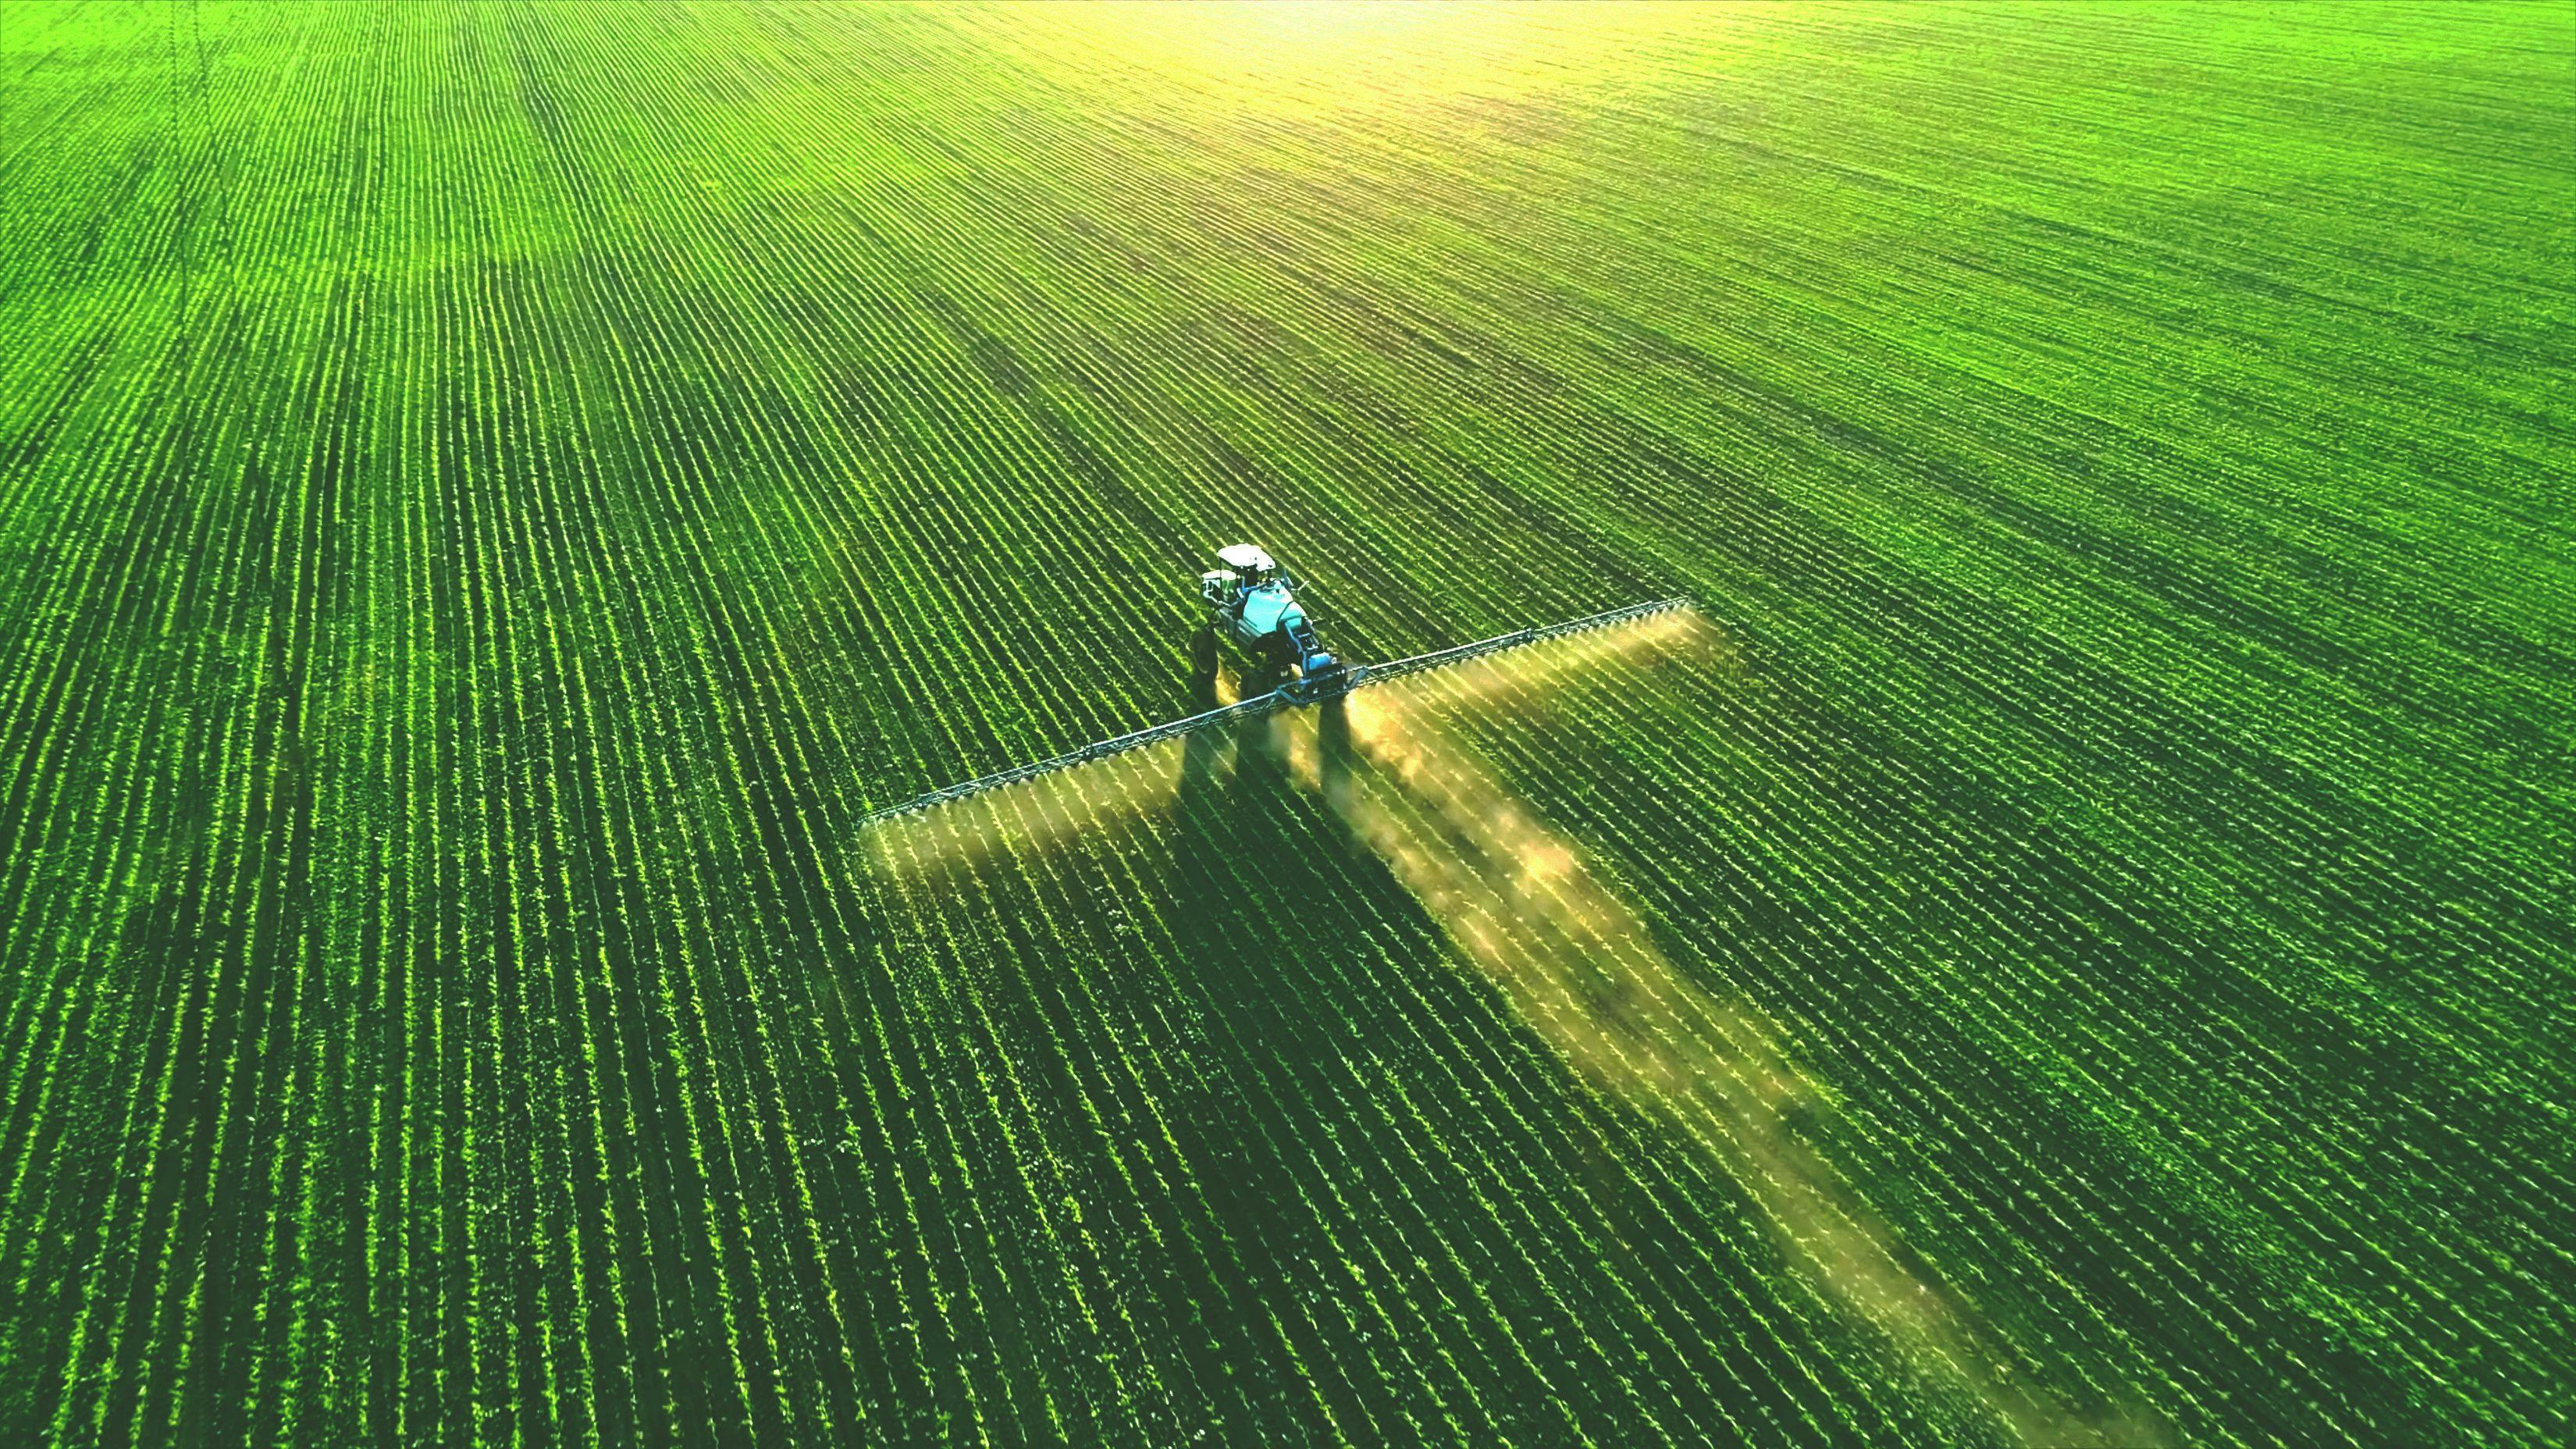 Tractor spray fertilizer on green field drone high angle view, agriculture background concept. | Image Credit: © Mose Schneider - stock.adobe.com. 